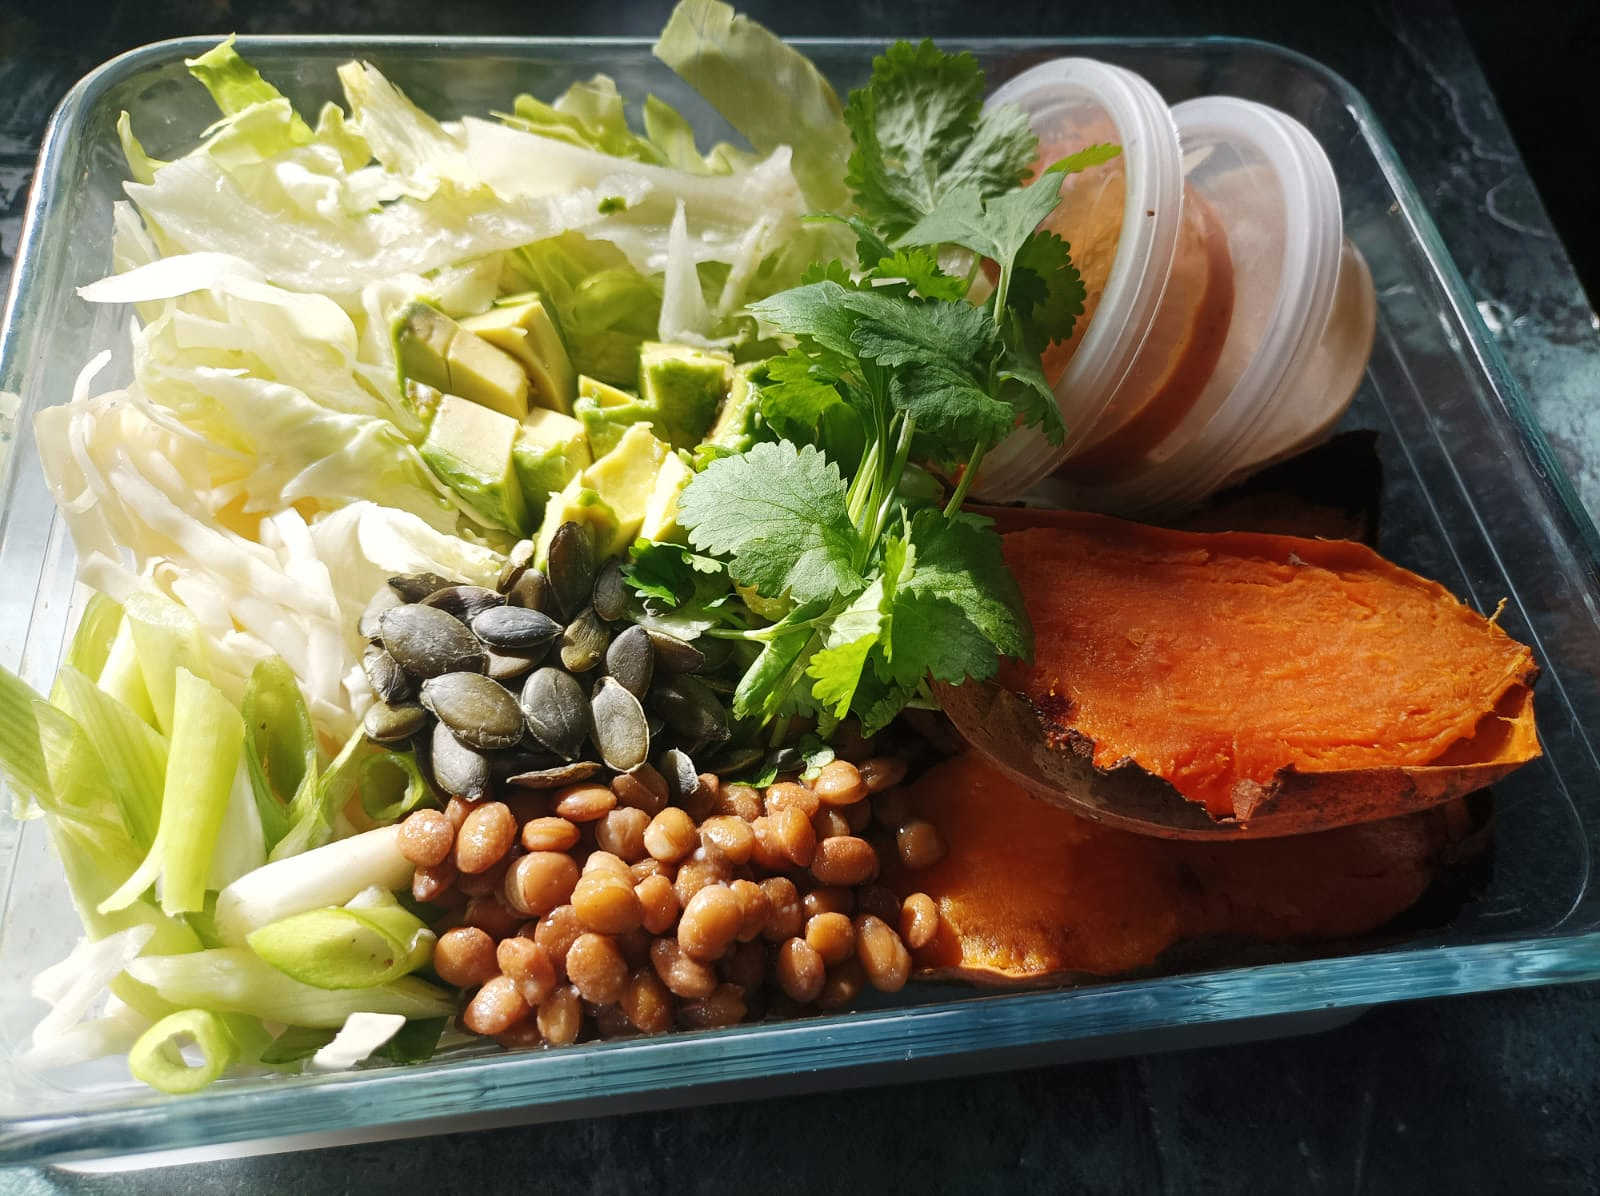 buddha bowl containing lentils, sweet potato, salad and chopped avocado in a glass dish with a dark and light background